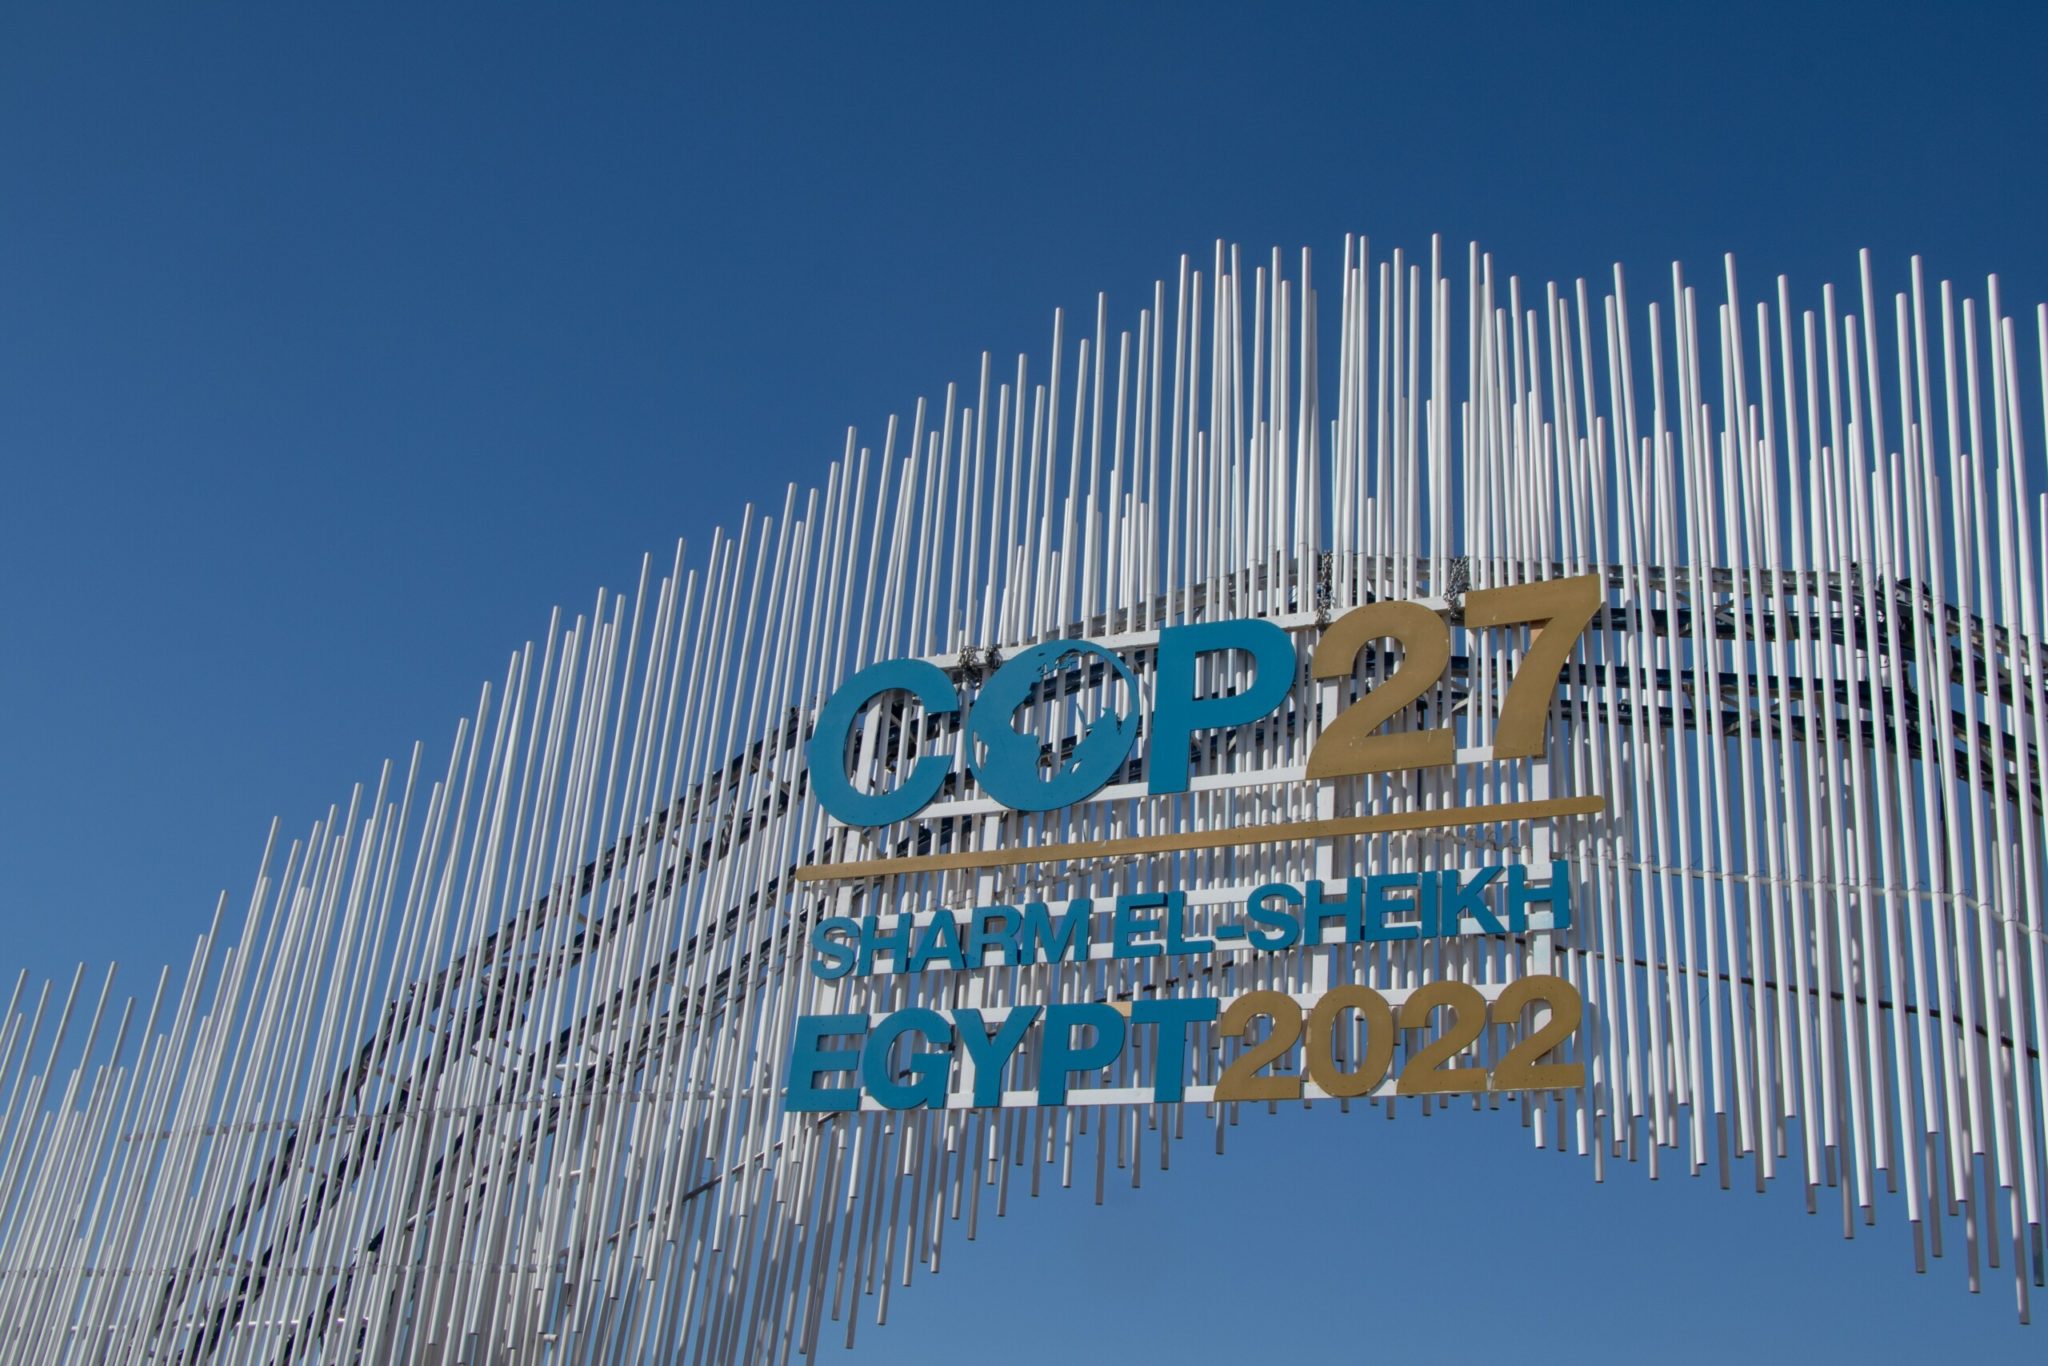 COP 27 took place in a ‘cop state’ amidst unprecedented geopolitical turbulence. The agreement on loss and damage could prove historic, but climate diplomacy needs to be strengthened outside the annual climate conference. Delegates left with much homework to do and little time to act.